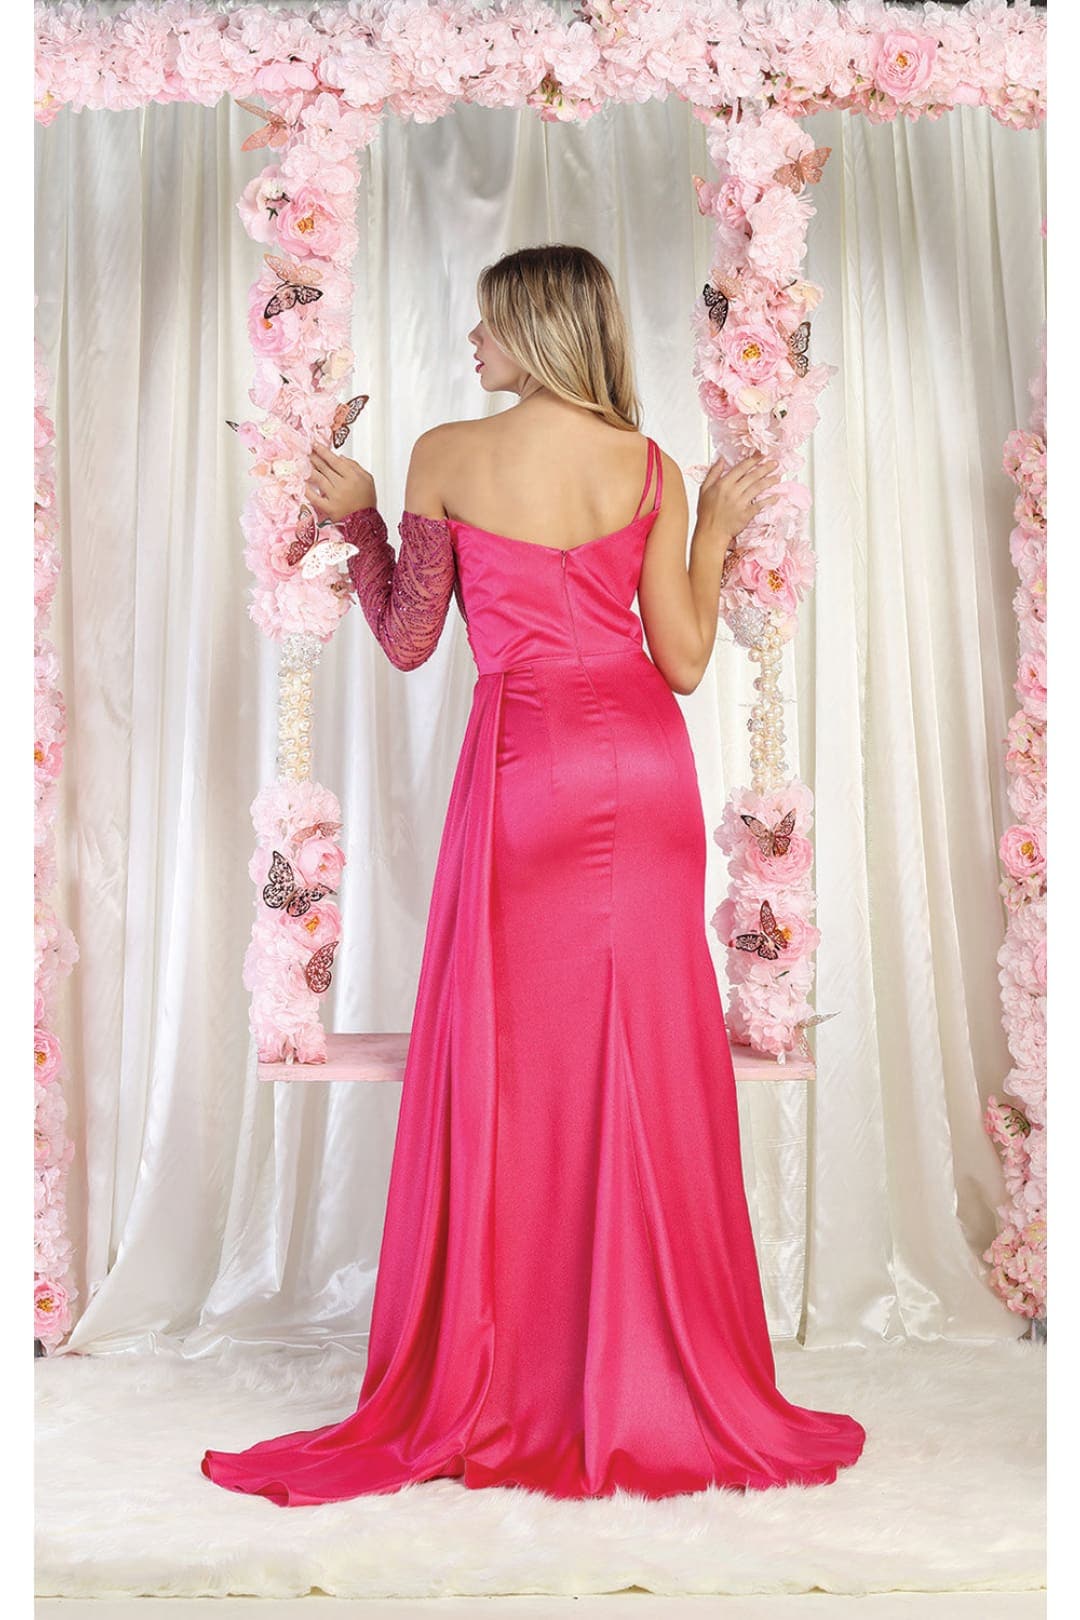 May Queen MQ2003 One Shoulder Embellished Prom Gown - Dress